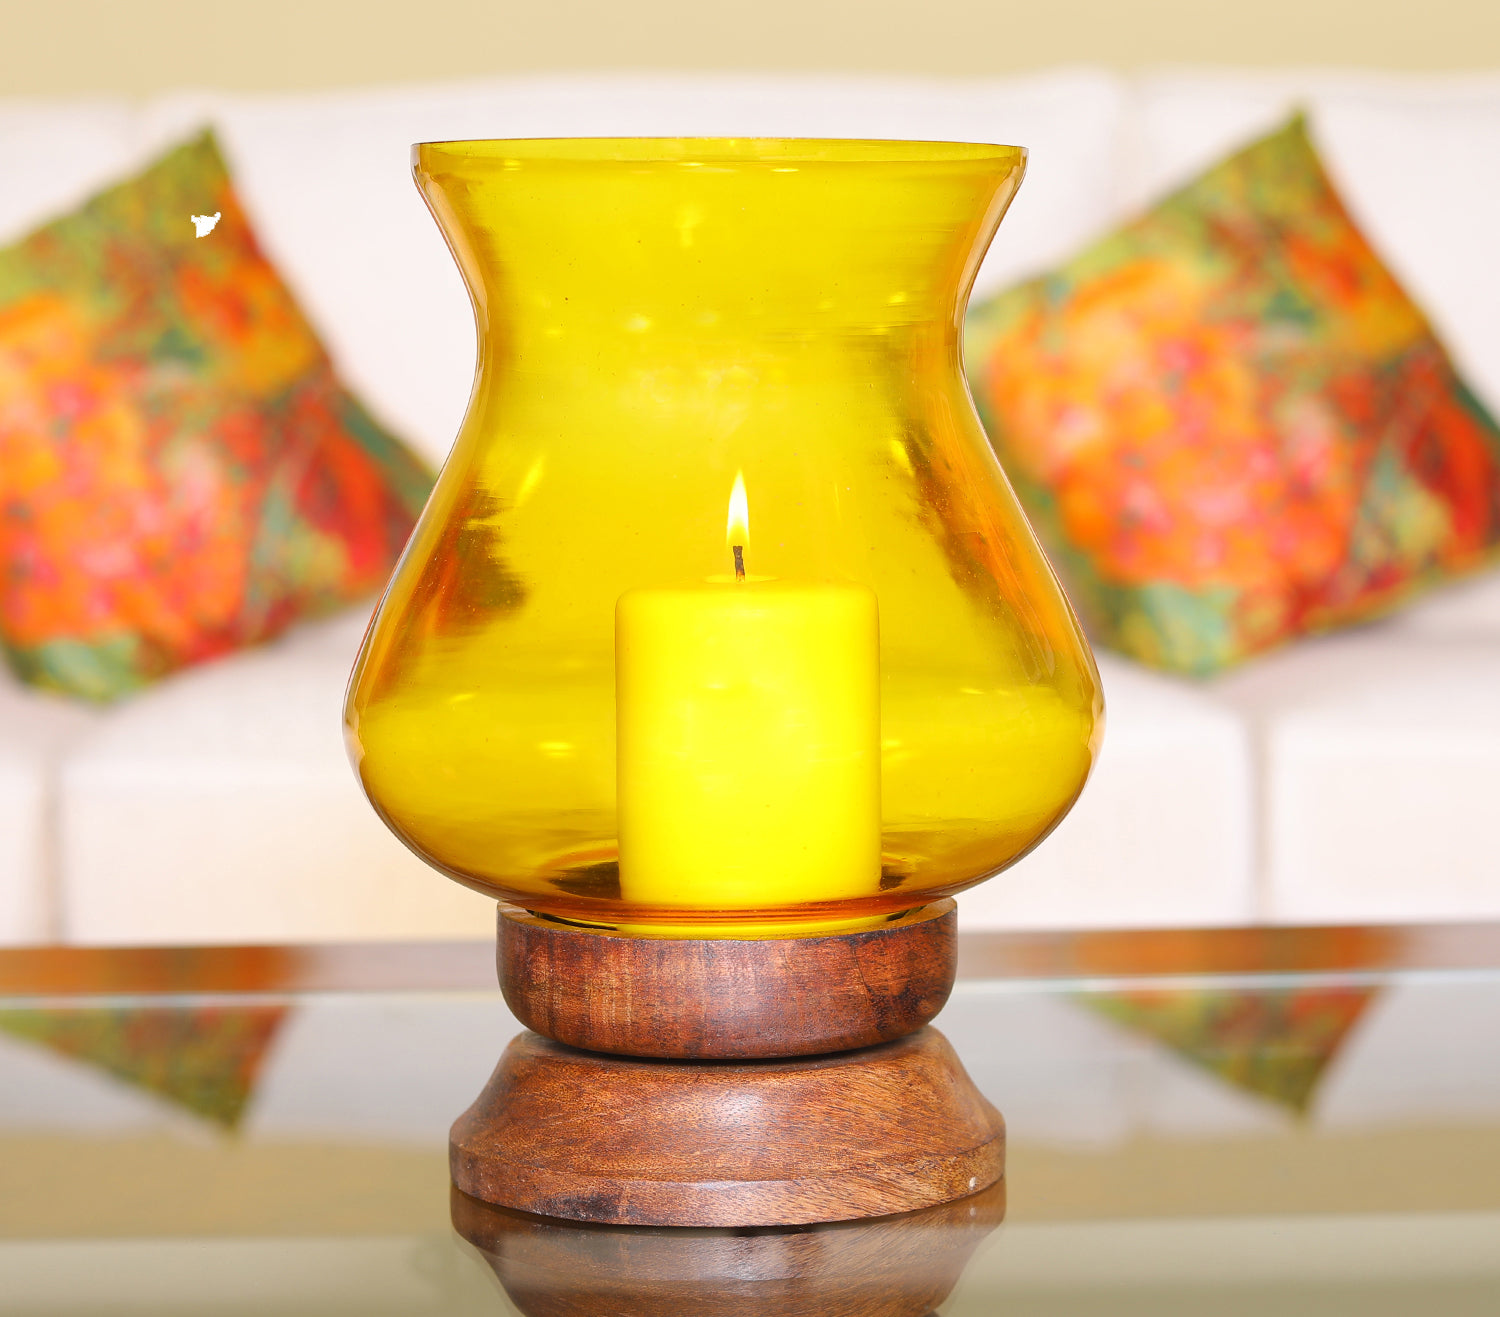 HOSLEY Pillar Candle Holder Beautiful Table Top Candle Holder with Pillar Candle made from Wood & Glass, Yellow, Pack of 1